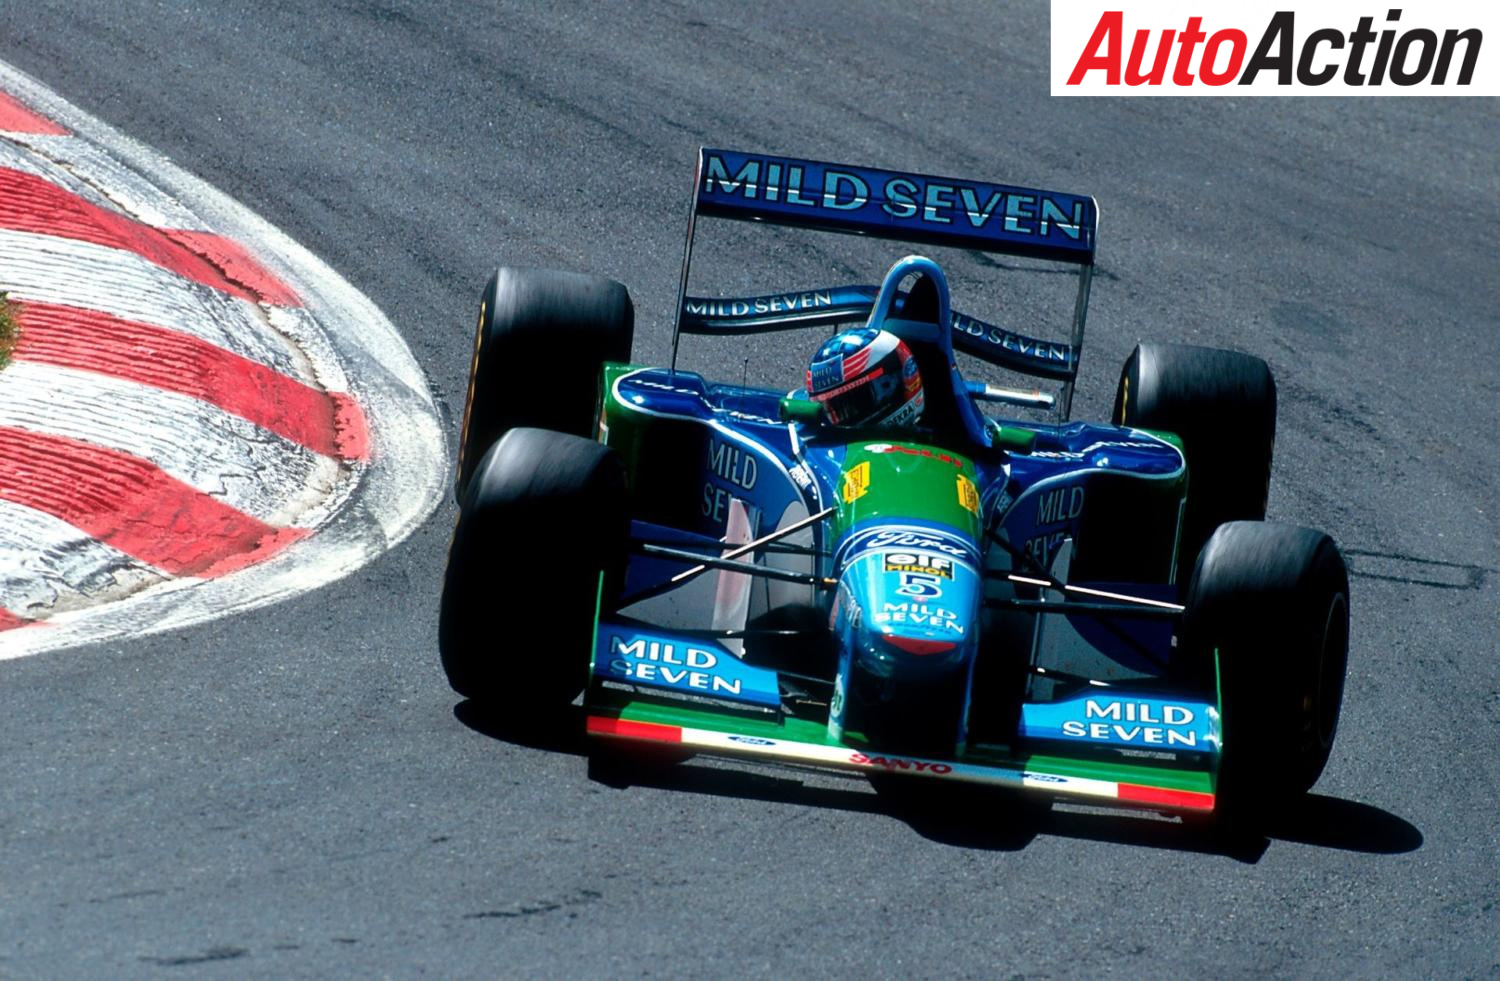 Michael Schumacher racing for Benetton at Spa in 1994 - Photo: LAT